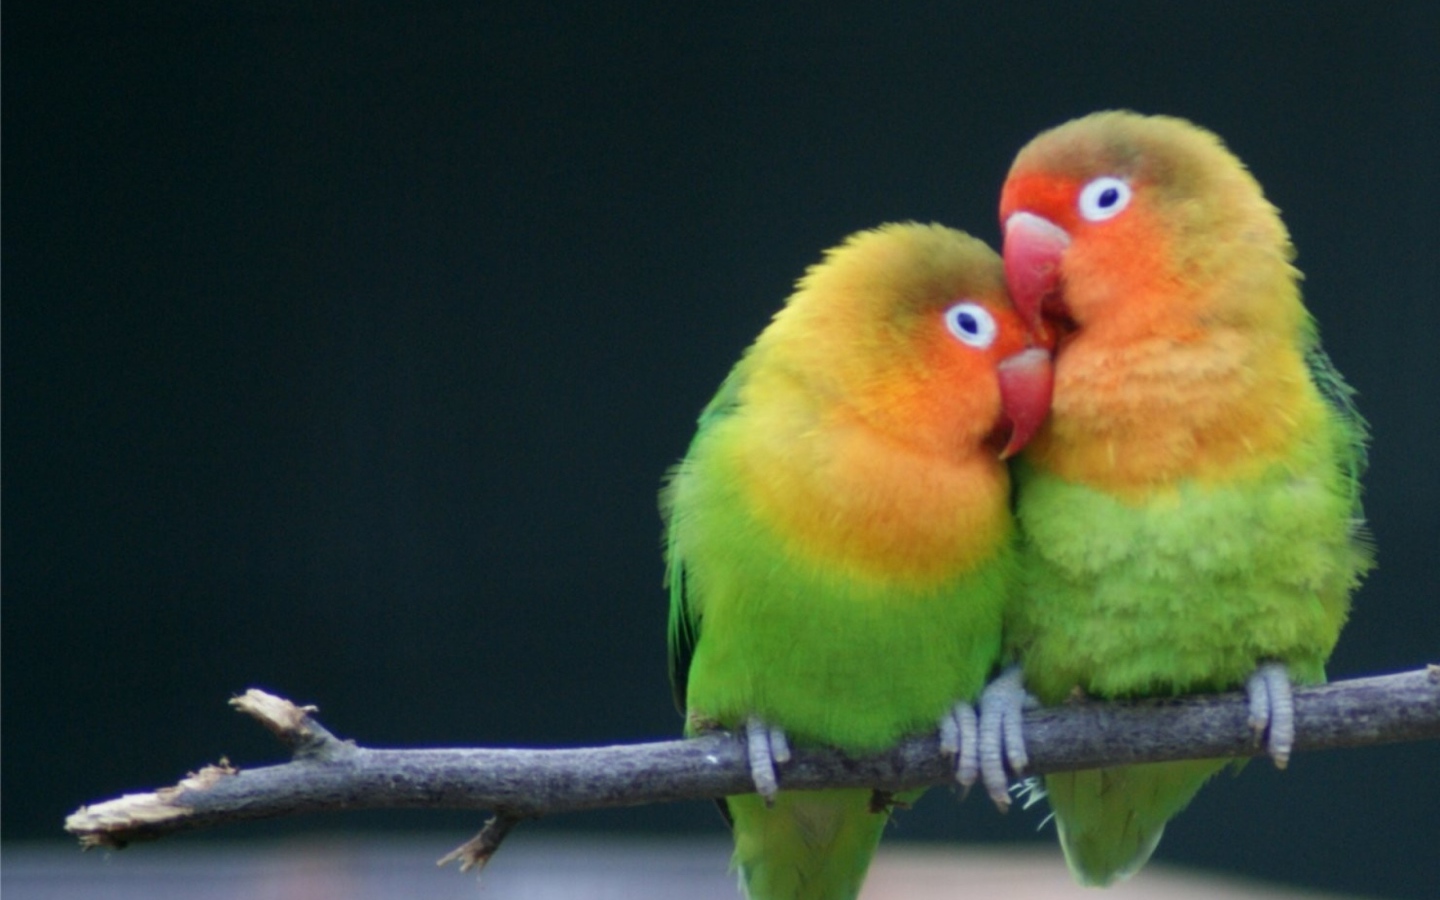 Love on a branch